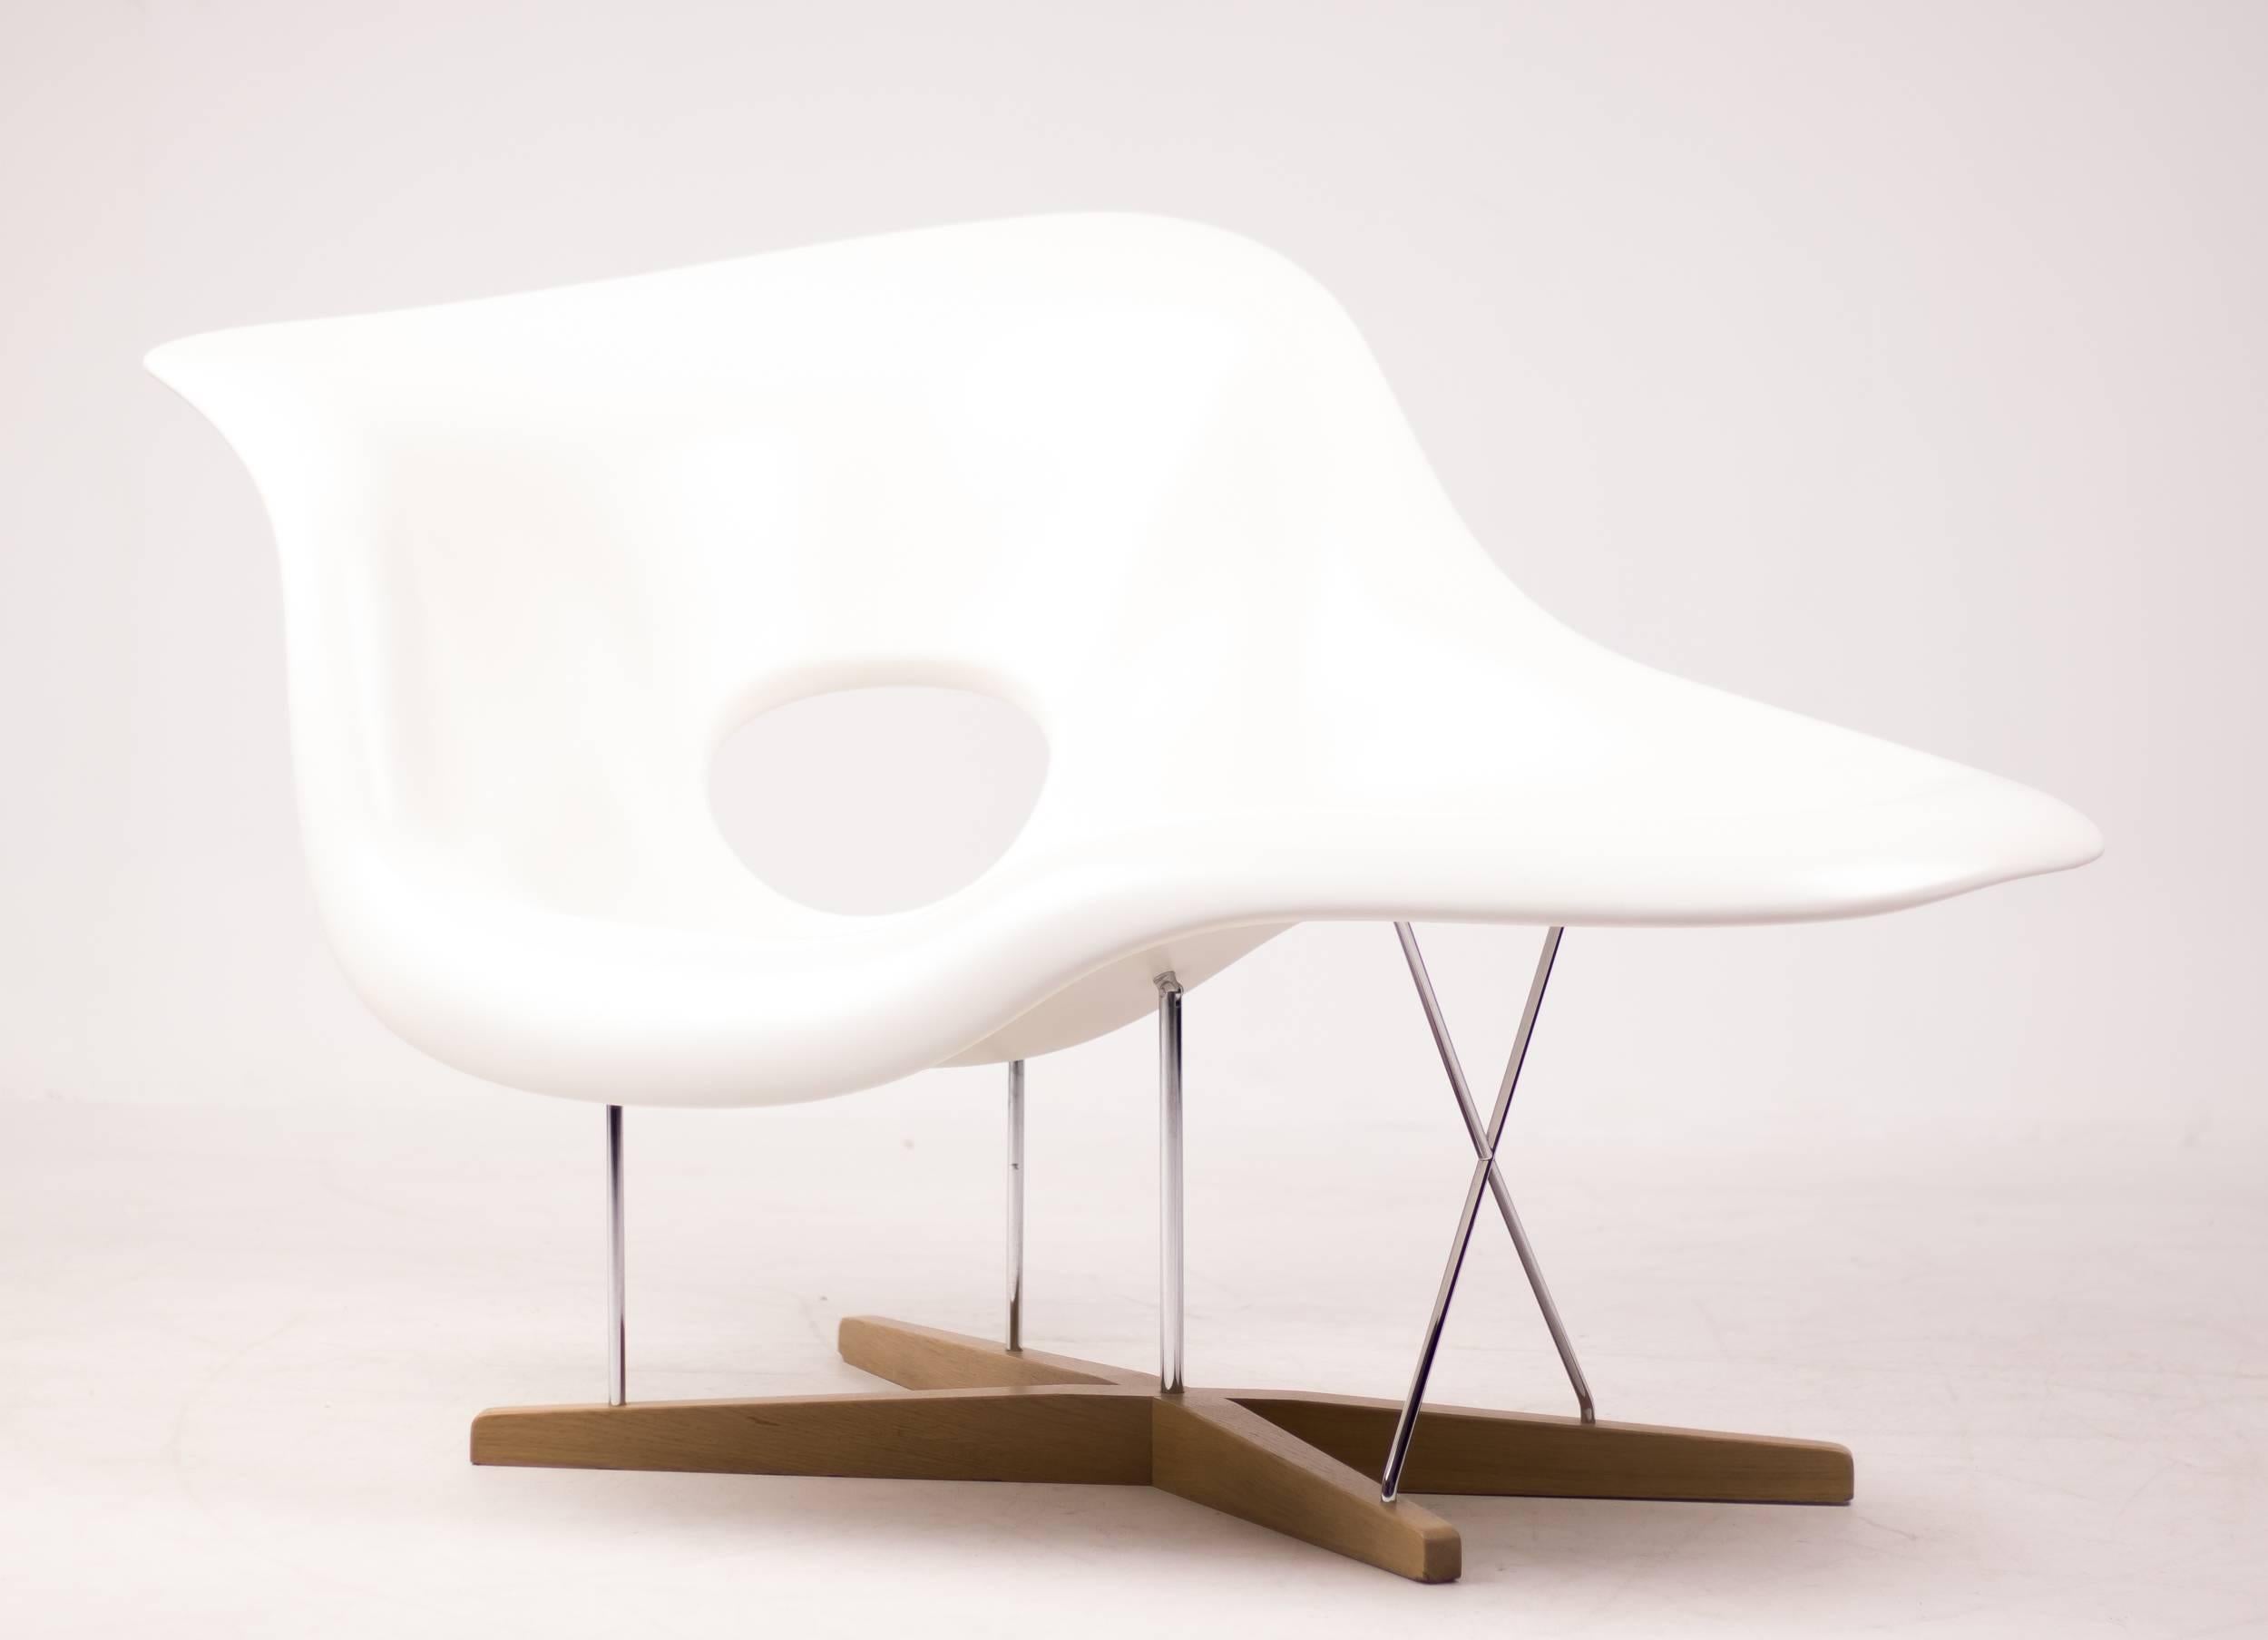 Charles and Ray Eames designed La Chaise in 1948 for a Museum of Modern Art competition. But it is only since 1991 that Vitra has been manufacturing small quantities of the design in serial production. La Chaise is suitable for both sitting and